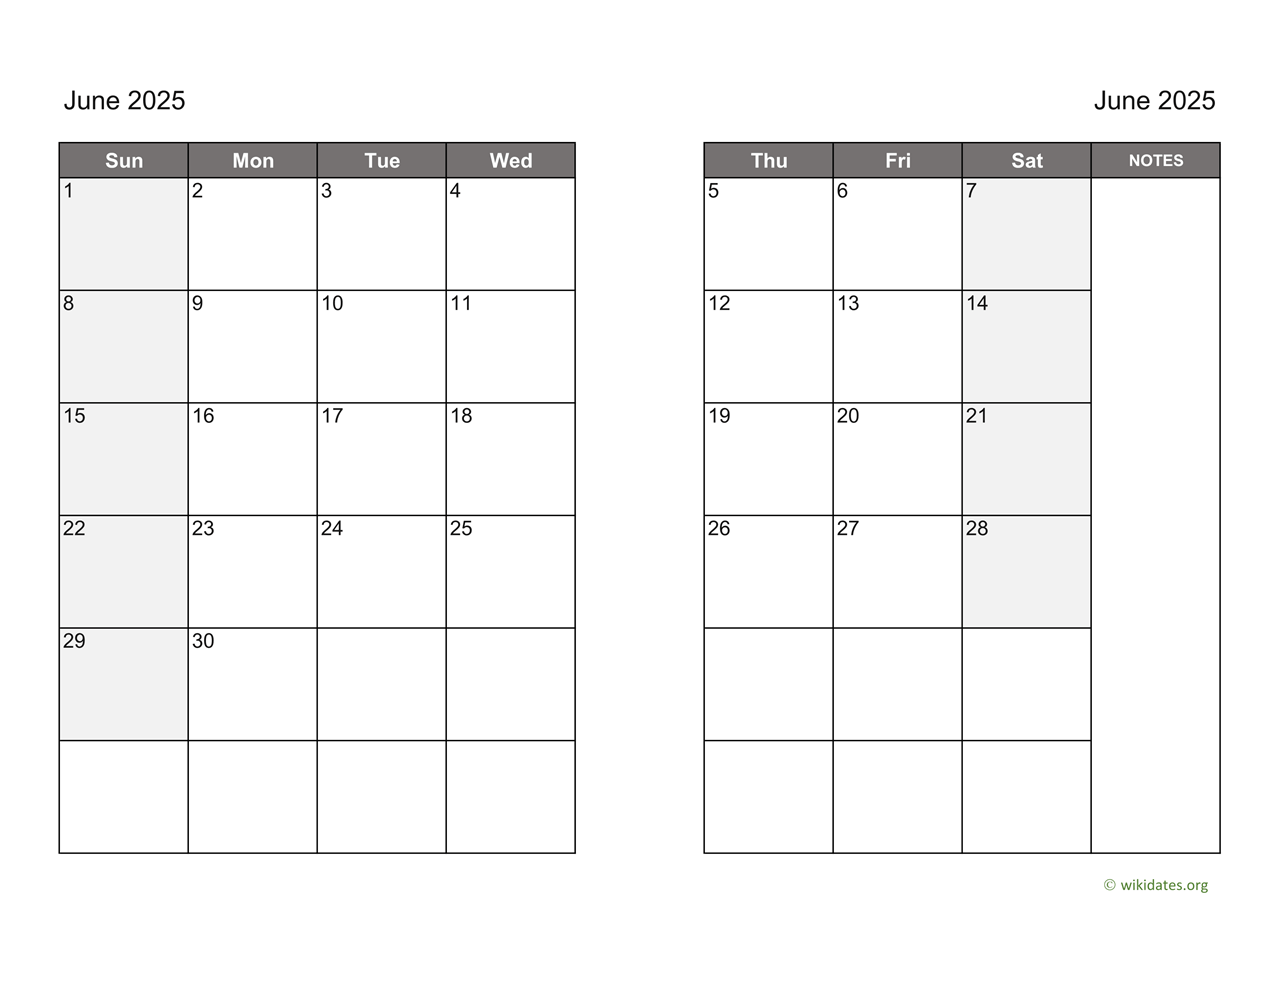 june-2025-calendar-on-two-pages-wikidates